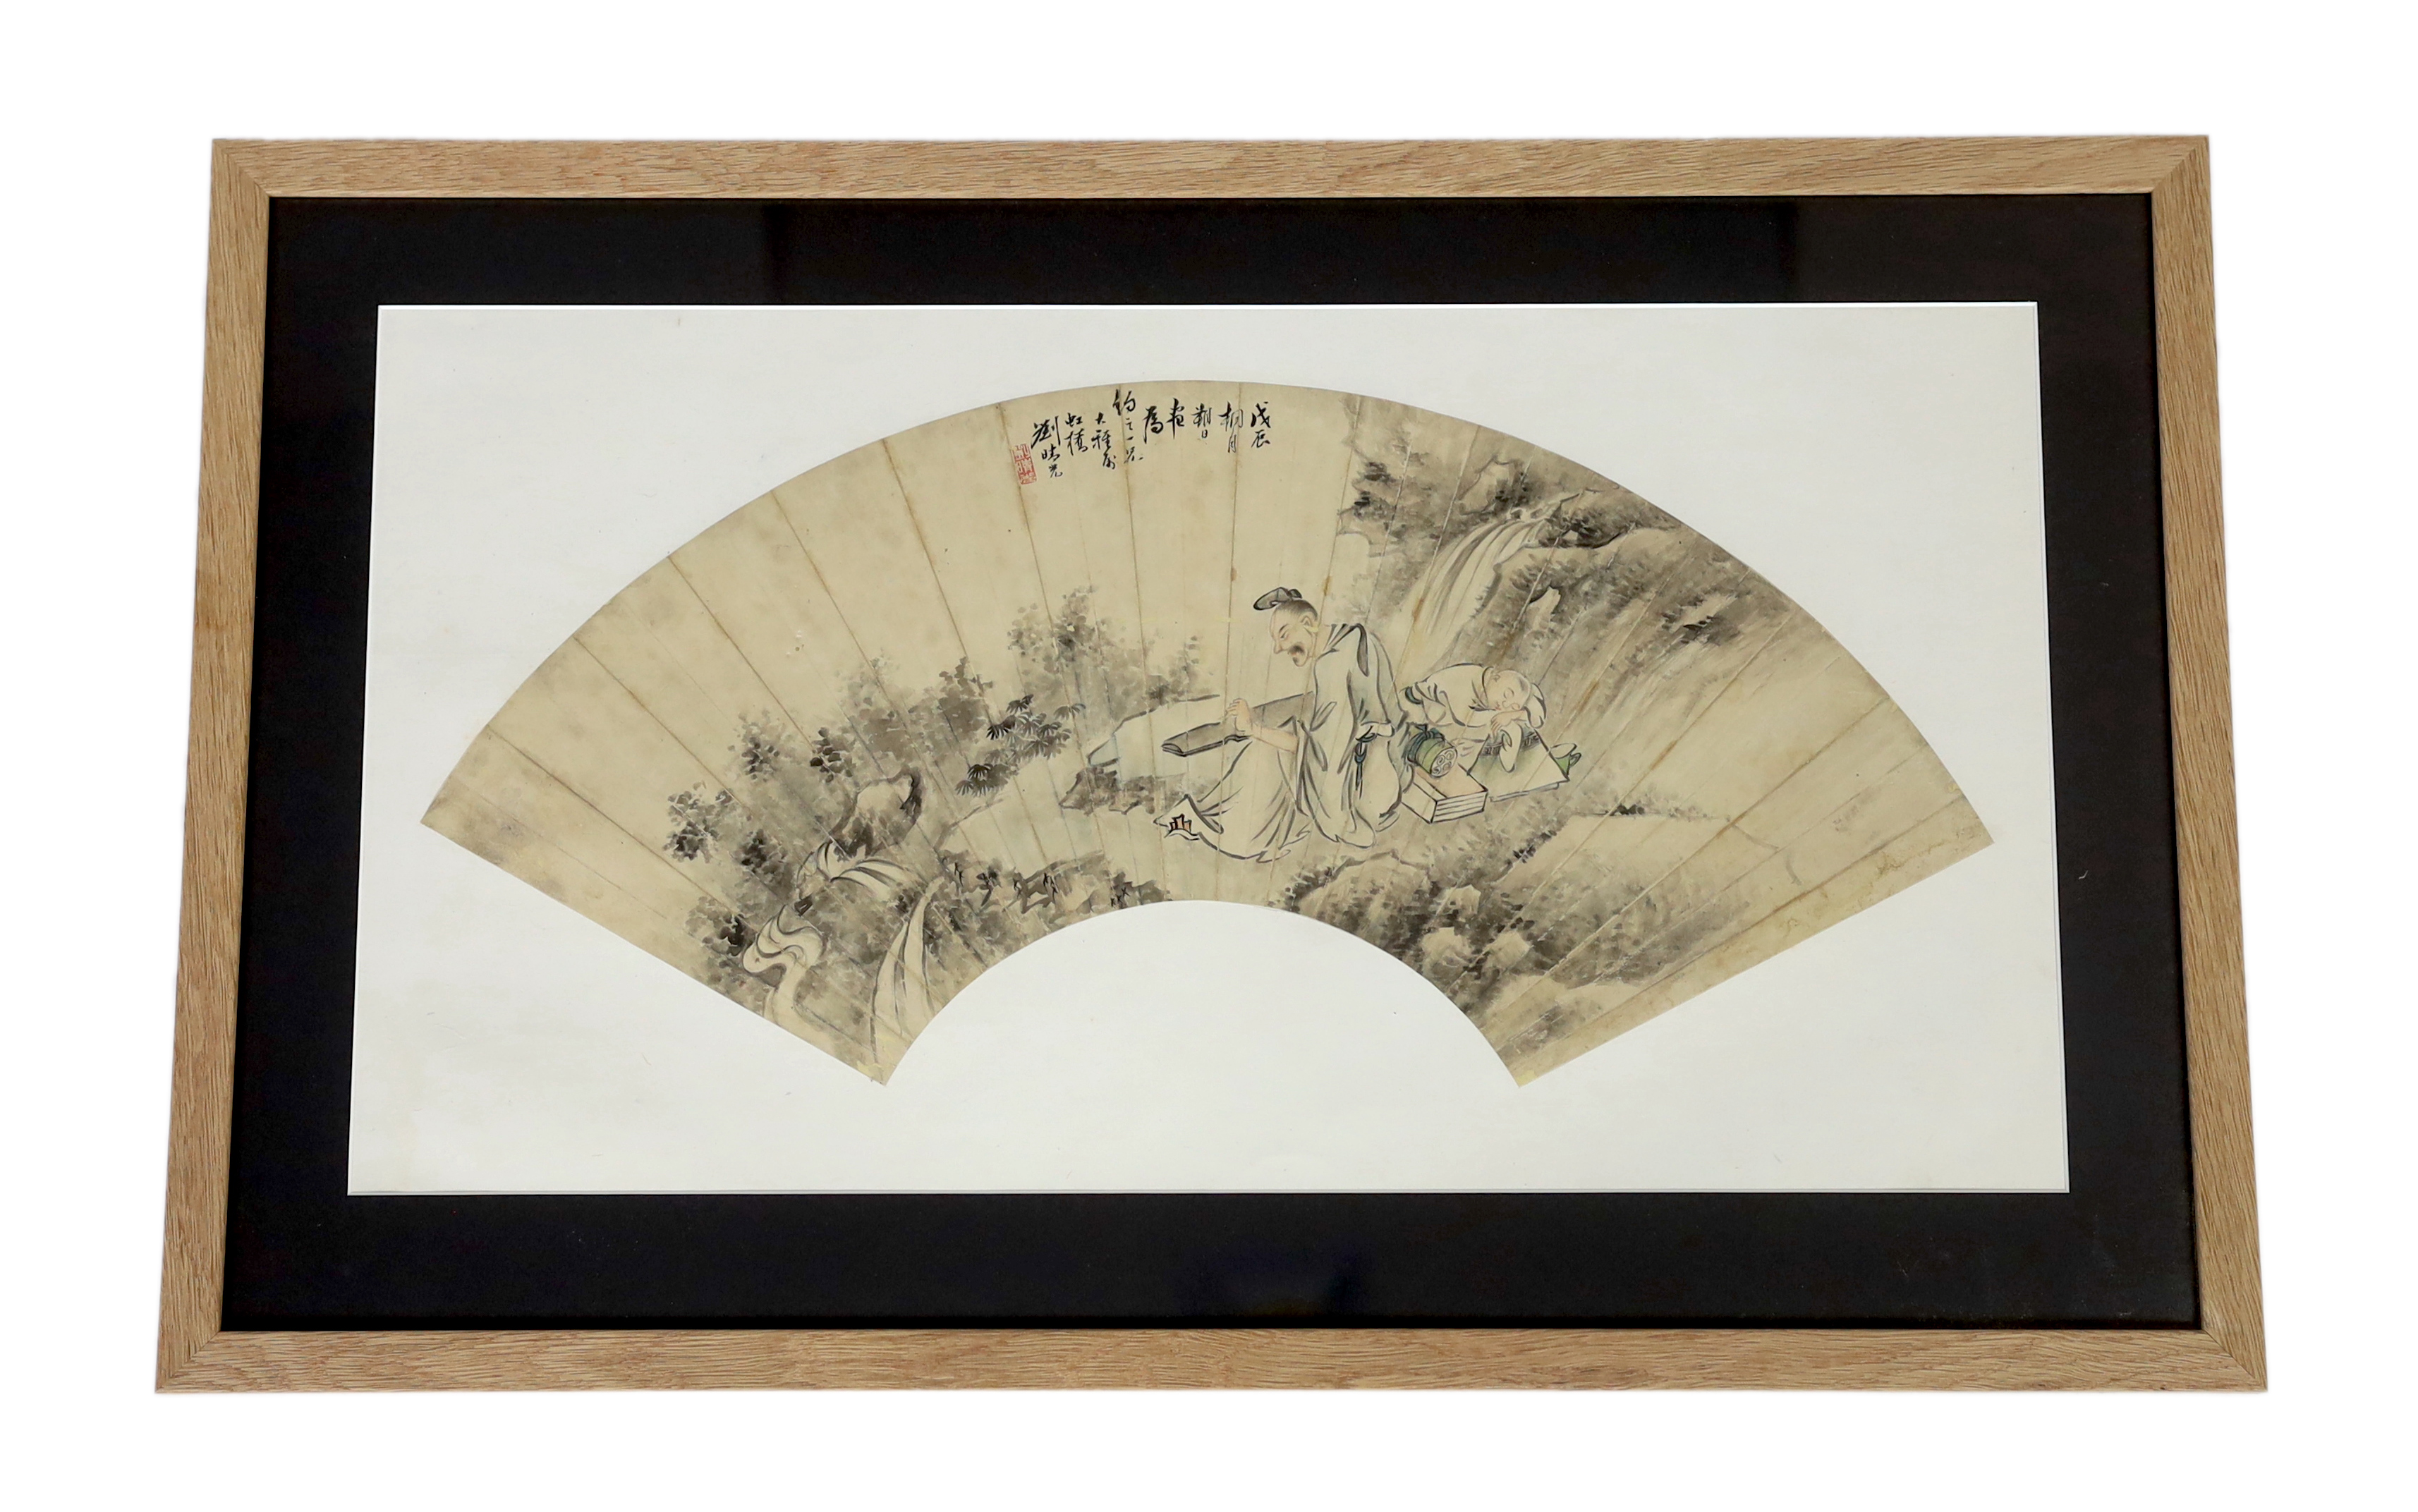 A Chinese fan leaf painting, 19th century                                                                                                                                                                                   